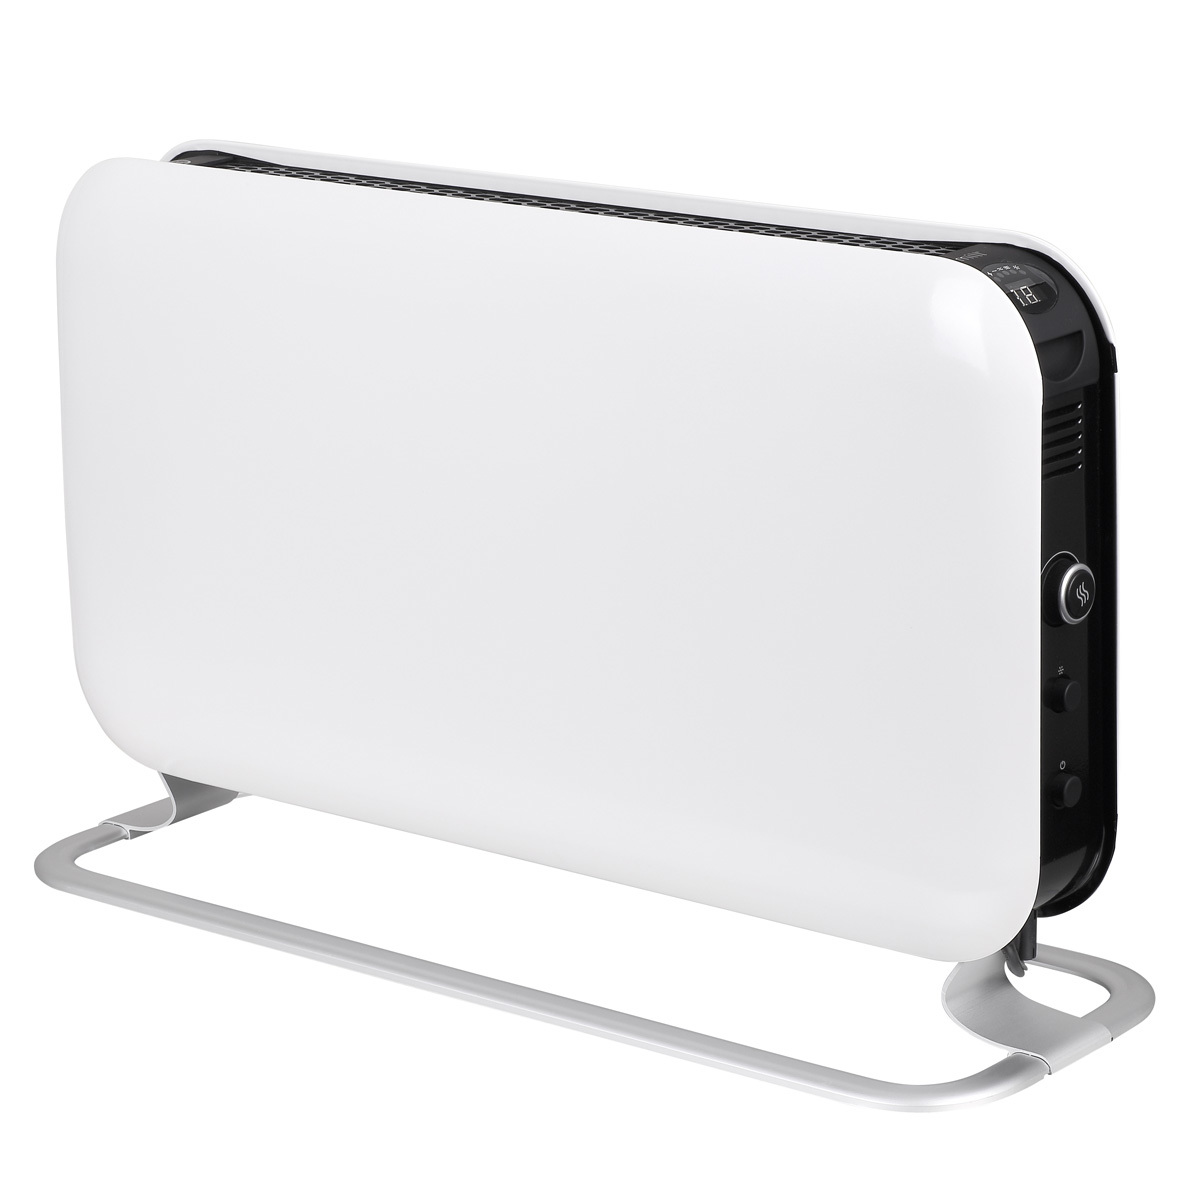 Mill Heat Electric LED 1.2kW Convector Radiator in White, SG1200WIFI